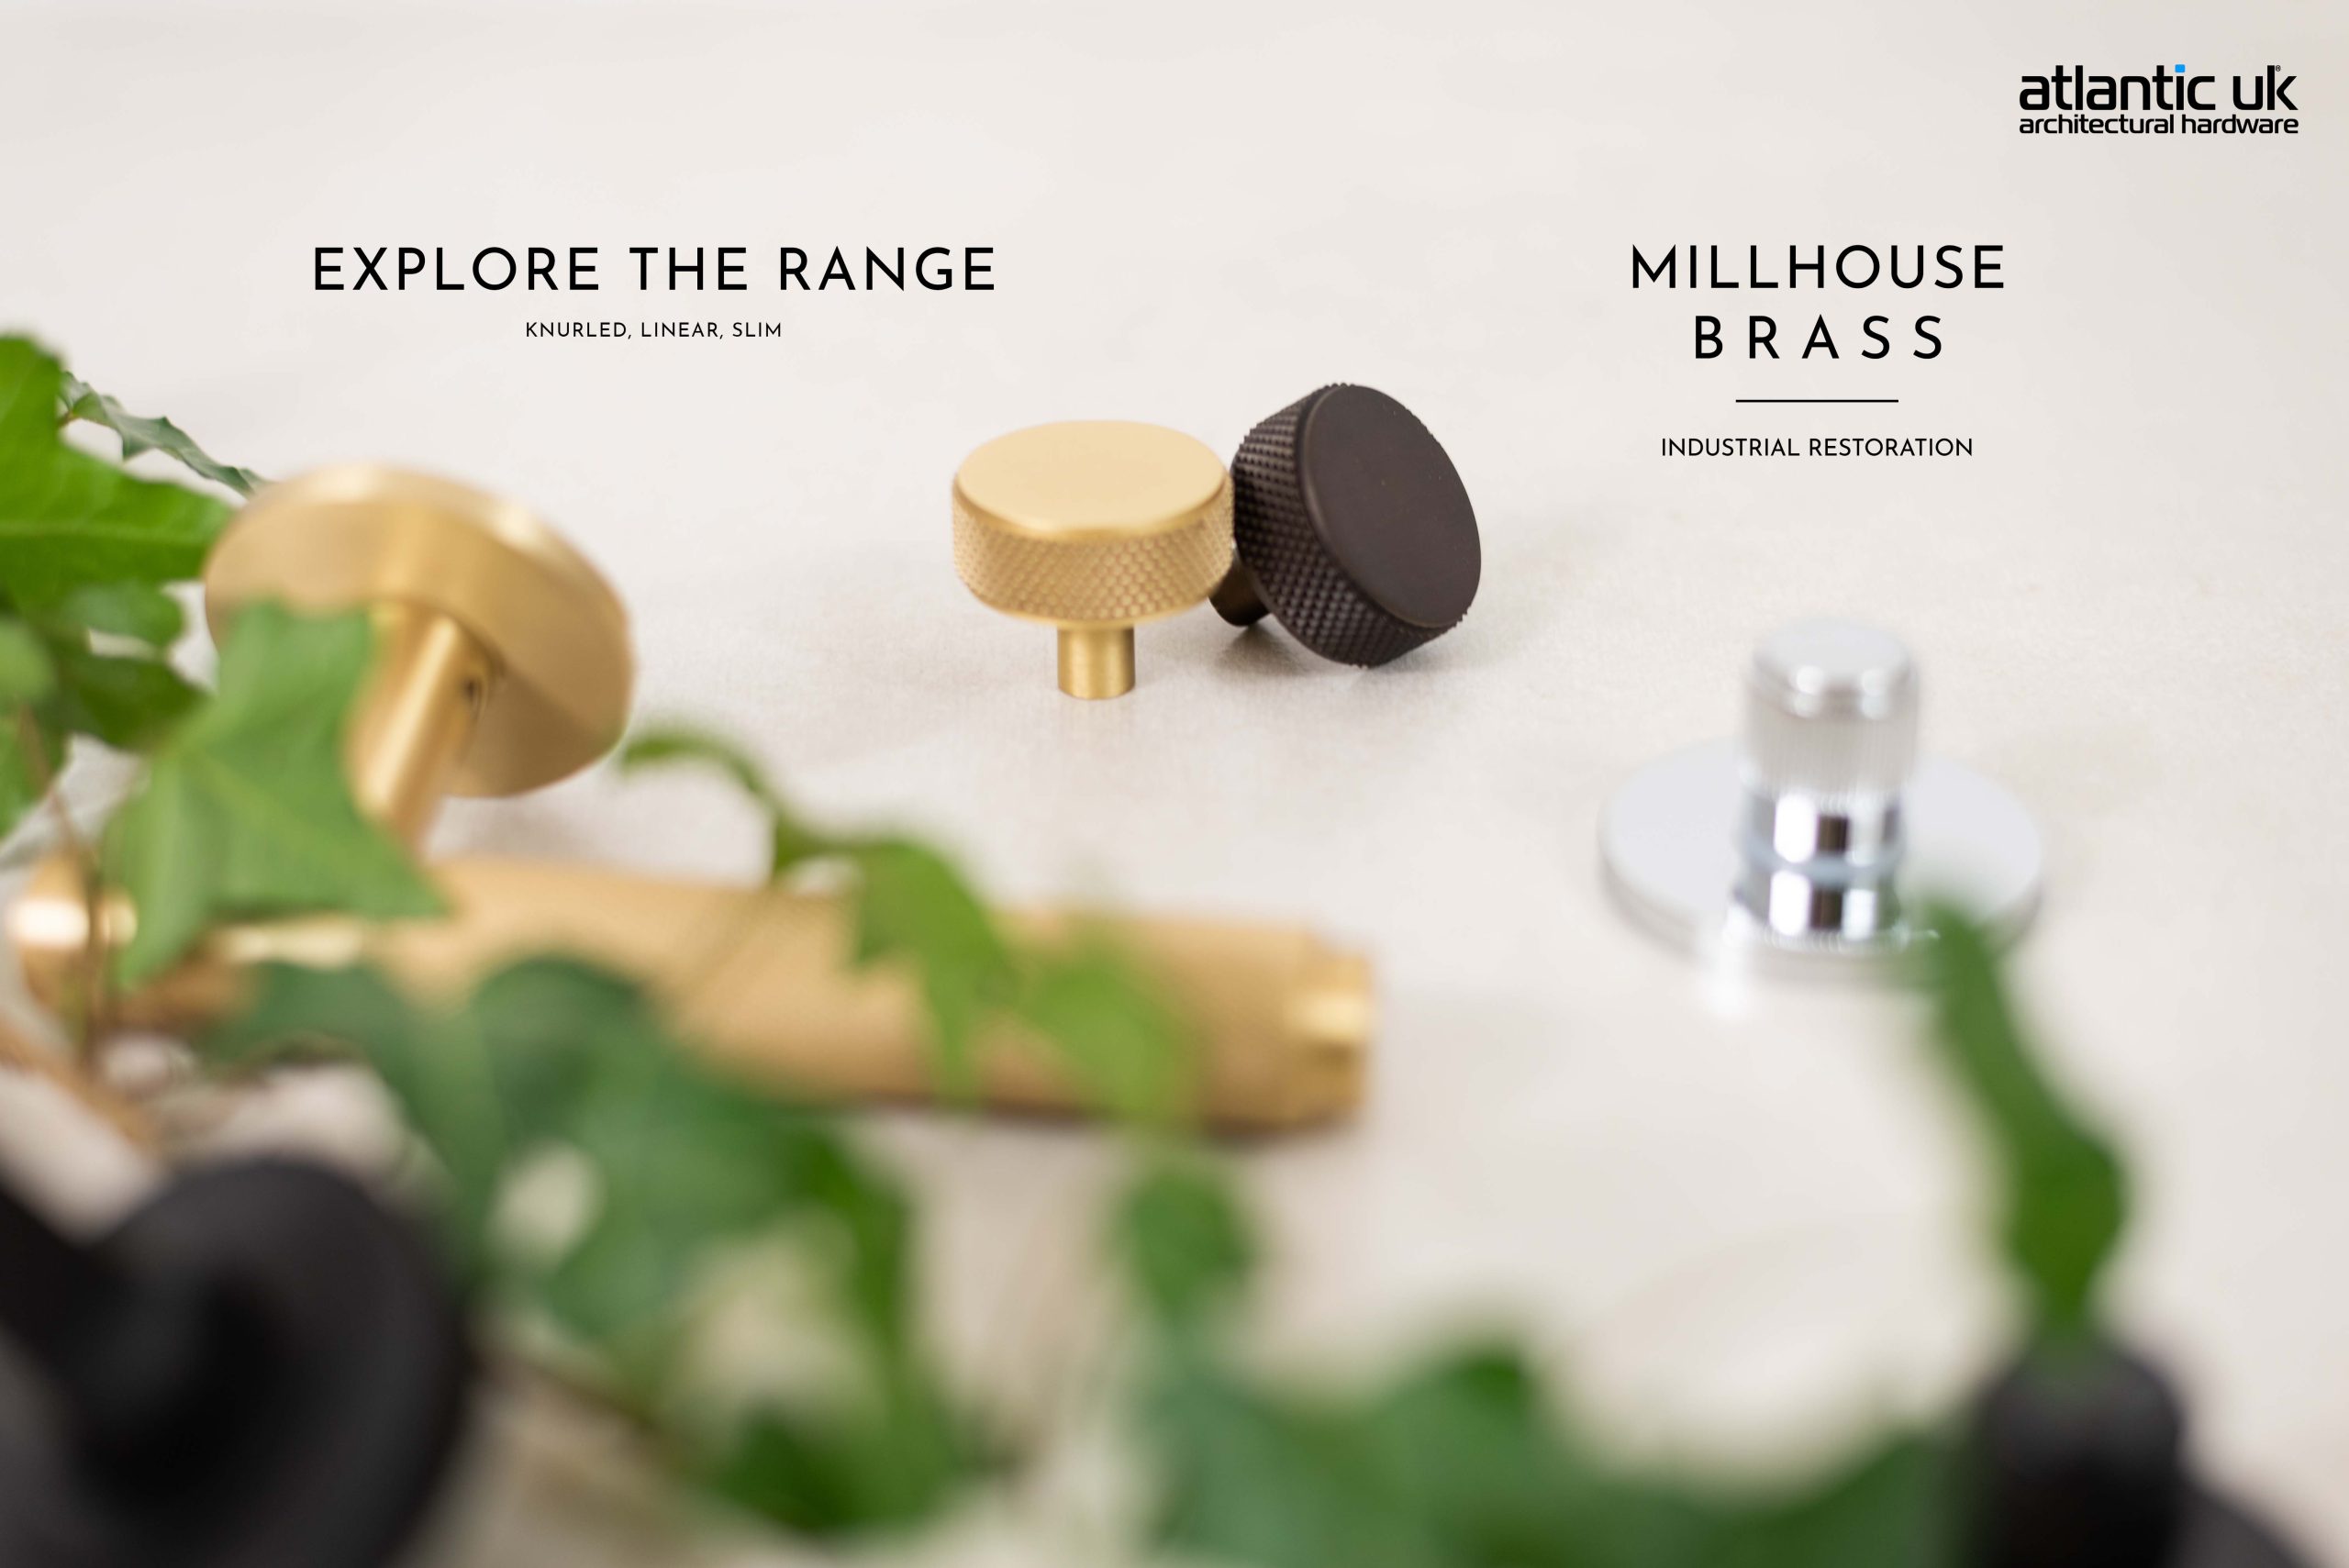 LEARN MORE ABOUT OUR LATEST MILLHOUSE BRASS DESIGNER LEVERS! image